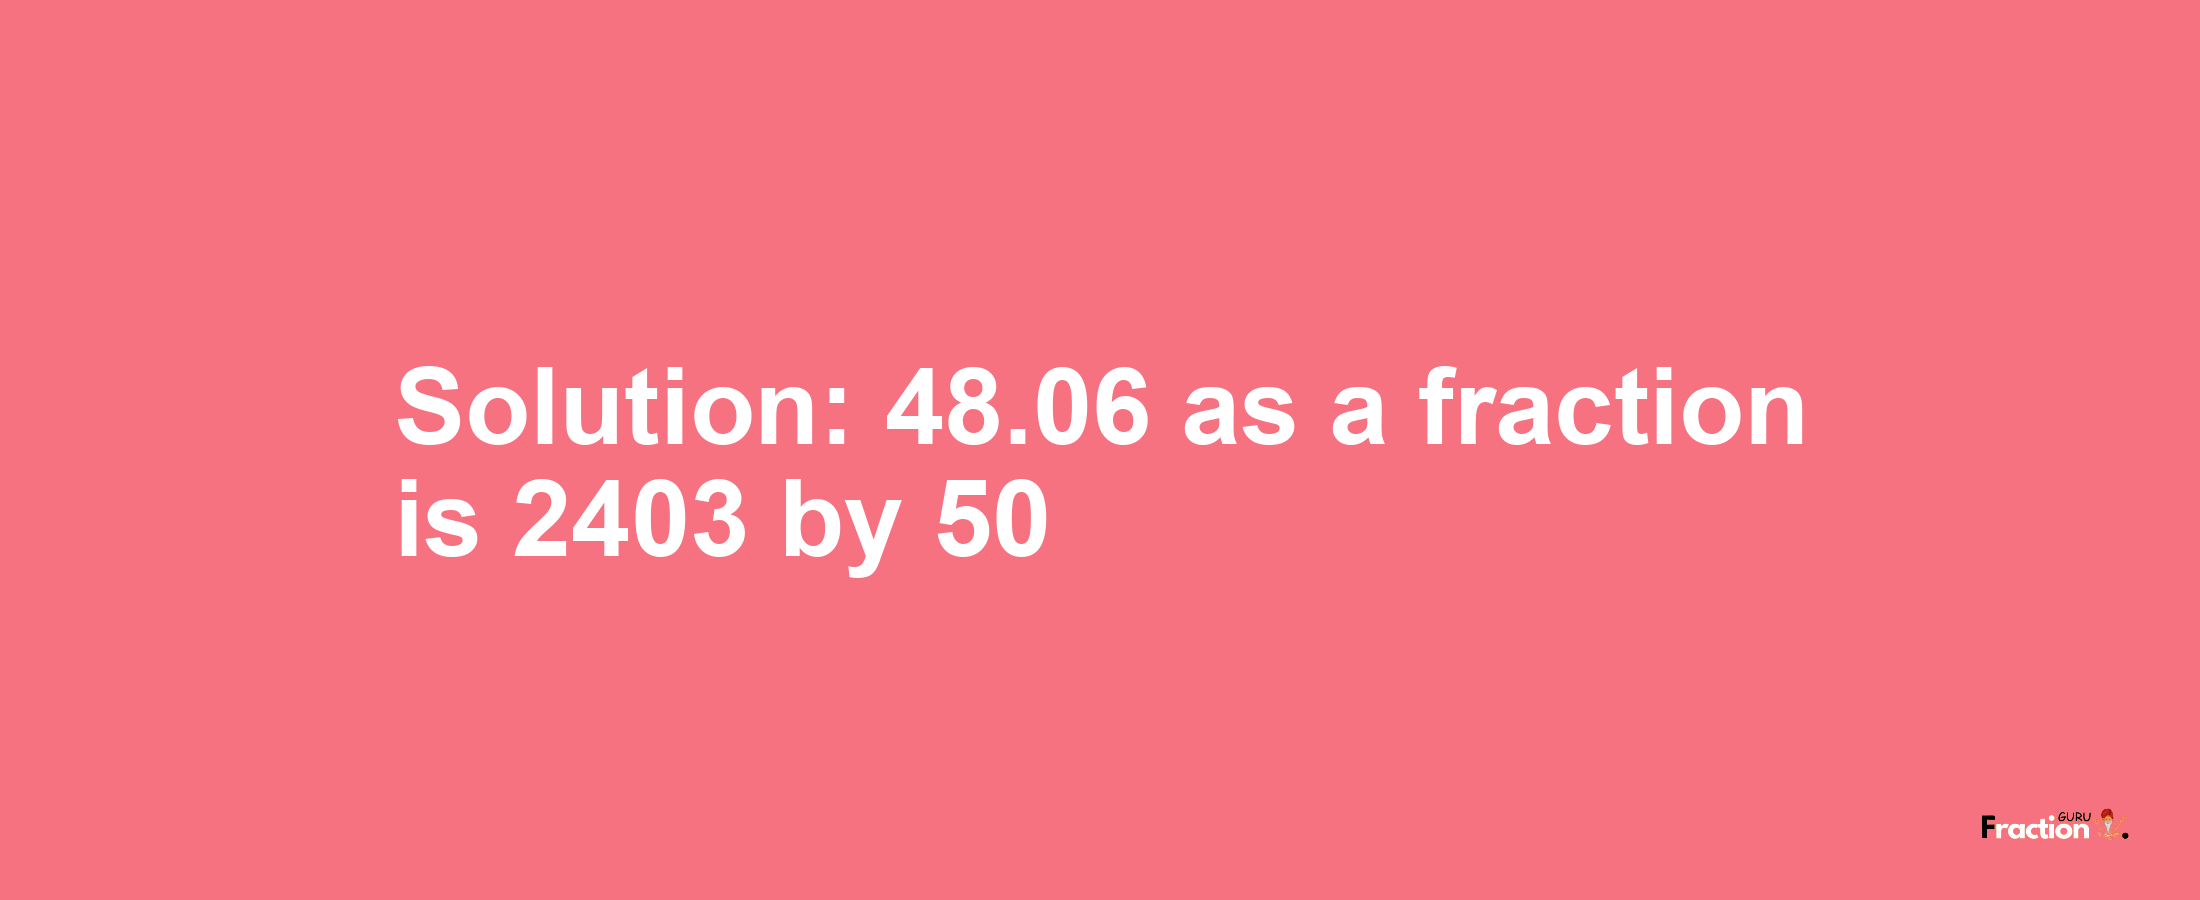 Solution:48.06 as a fraction is 2403/50